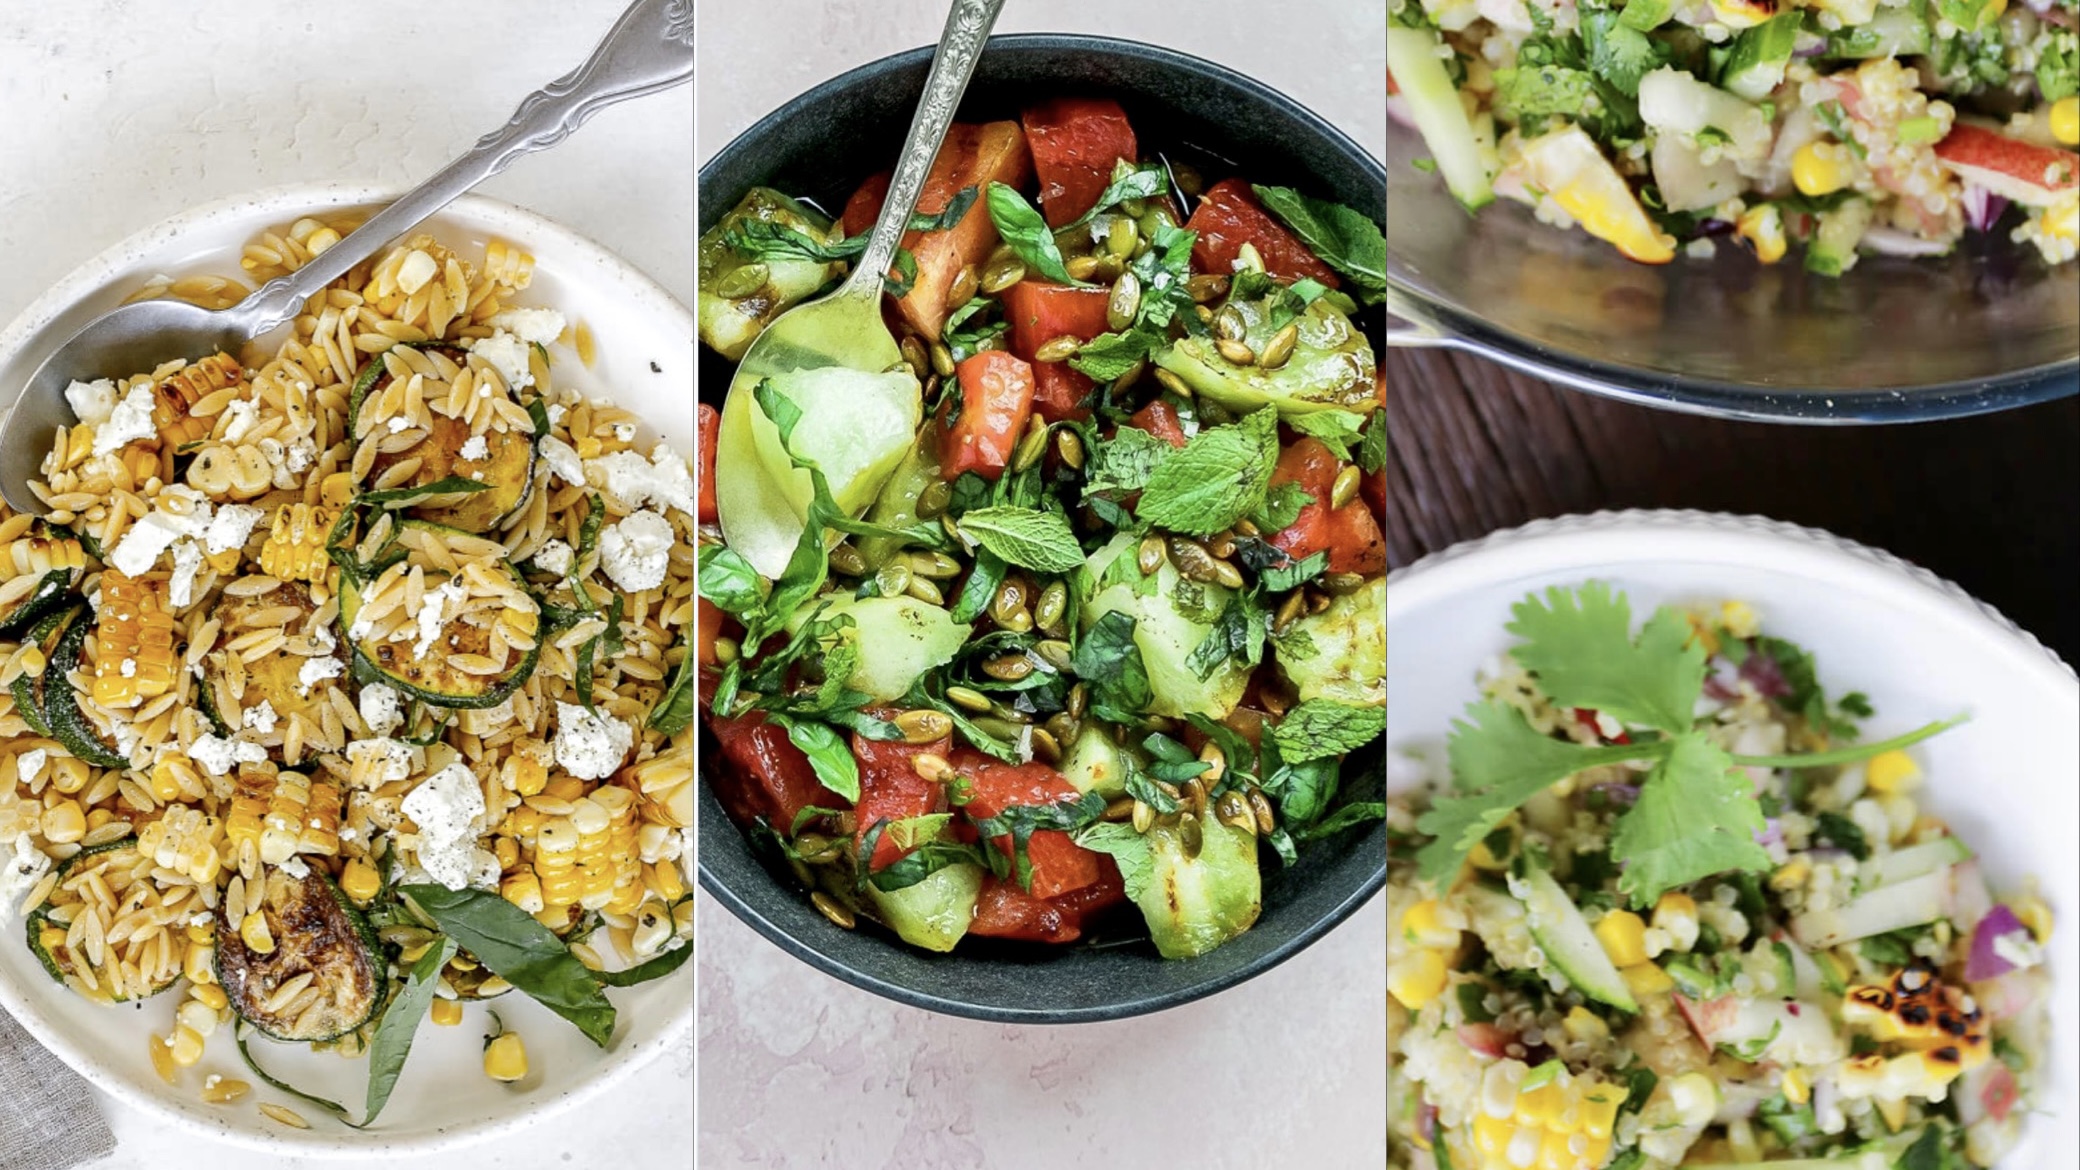 Trio of grilled summer salads